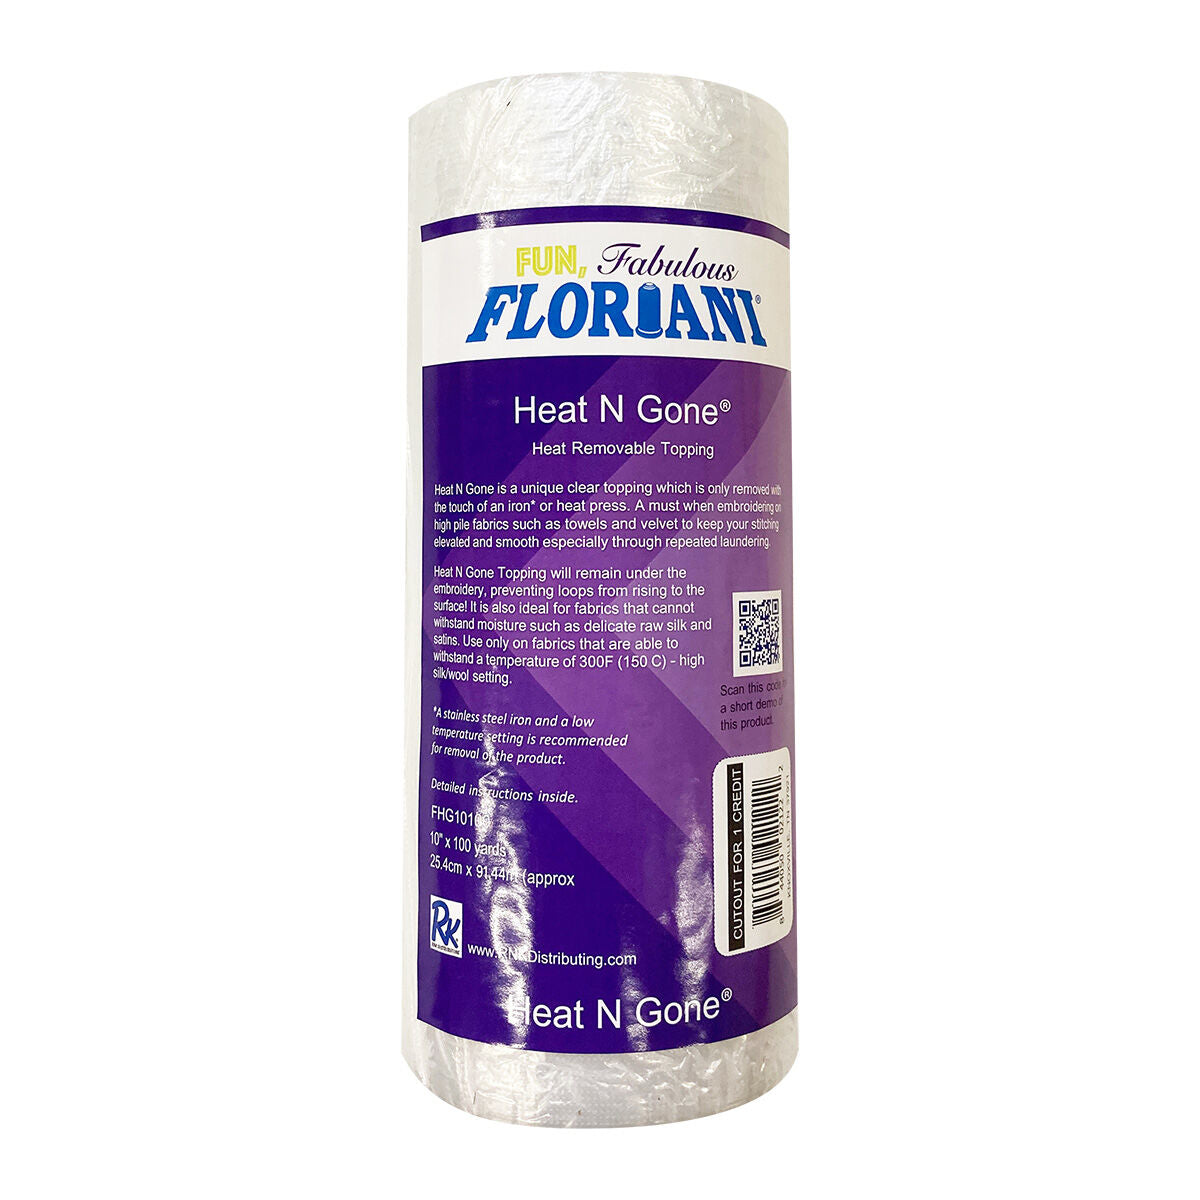 Floriani Stabilizer Heat N Gone Topping,Floriani Stabilizer Heat N Gone Topping,Floriani Stabilizer Heat N Gone Topping 20" x 10yds,Floriani Stabilizer Heat N Gone Topping 10" x 25yds,Floriani Stabilizer Heat N Gone Topping 10" x 100yds